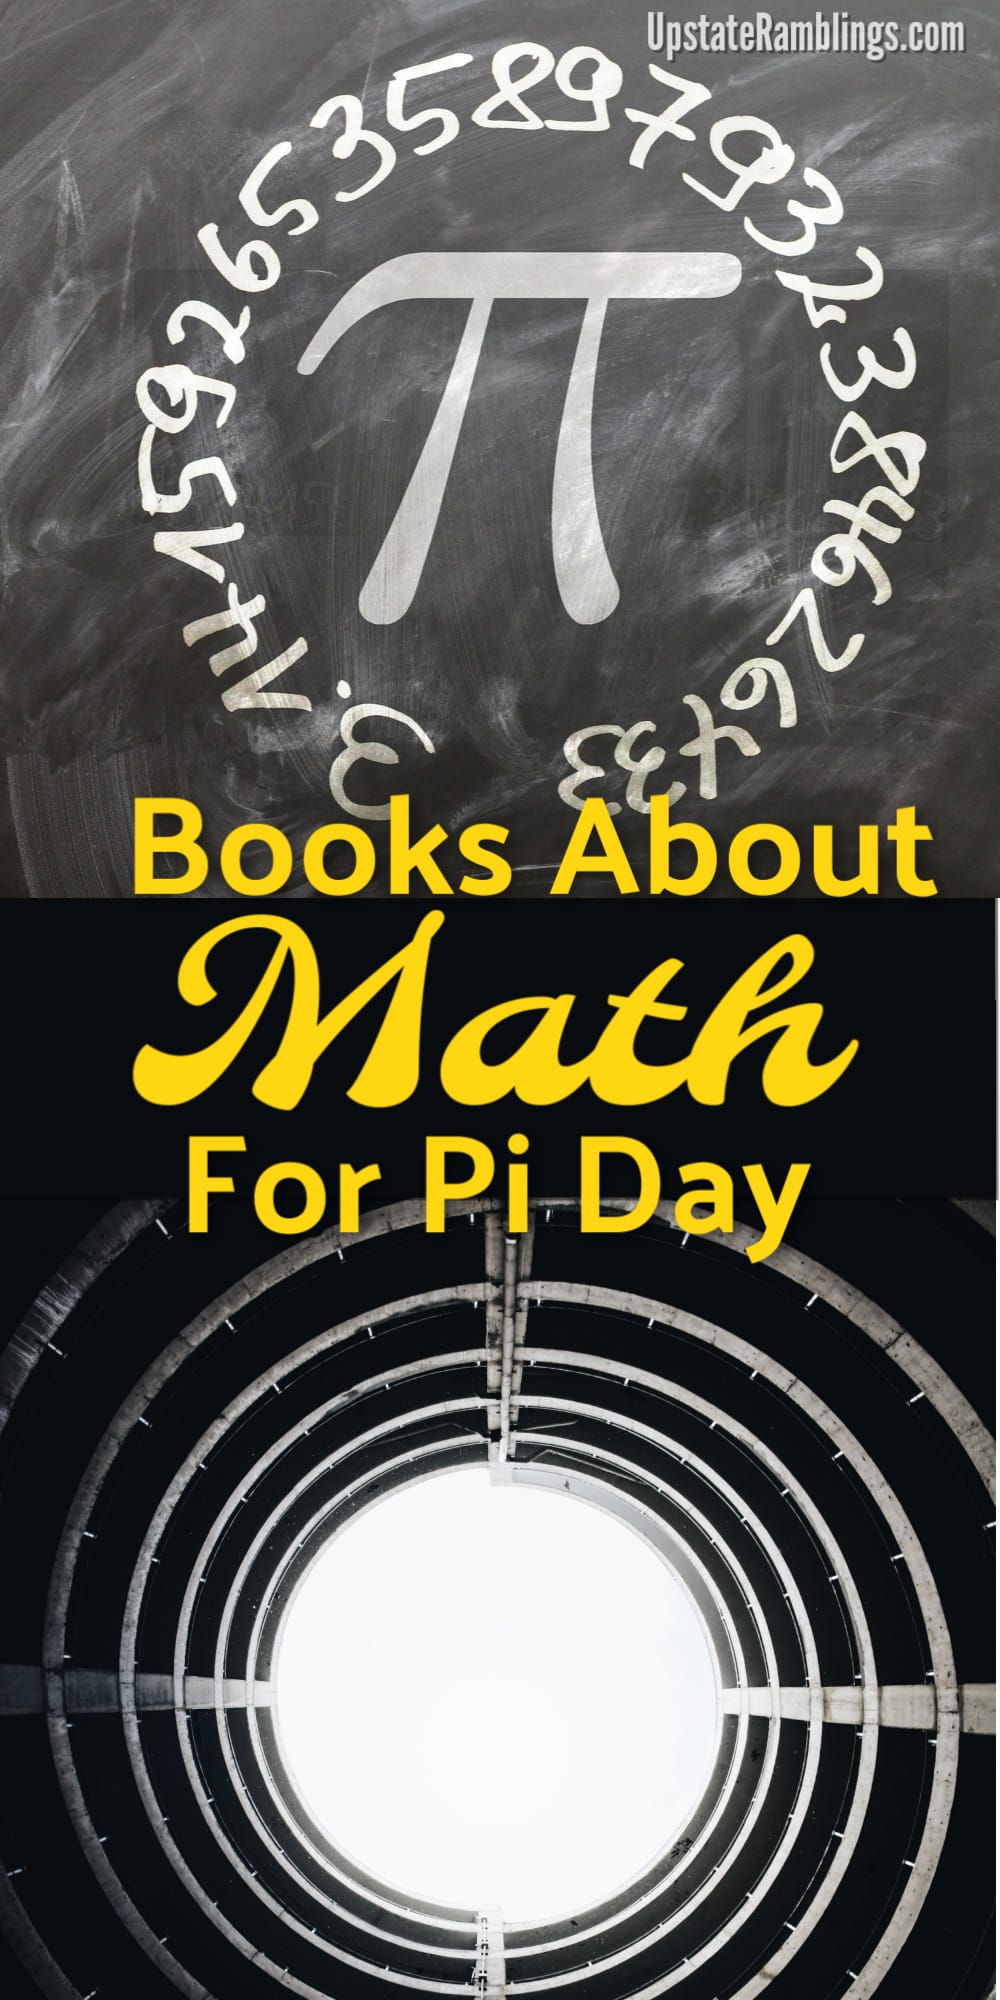 March 14th is Pi Day, the perfect day to celebrate mathematics! If you want to learn more about pi, including its meaning and history, here are some books worth checking out, both for children and adults. Perfect for homeschoolers, or anyone who is fascinated by irrational numbers. #math #piday